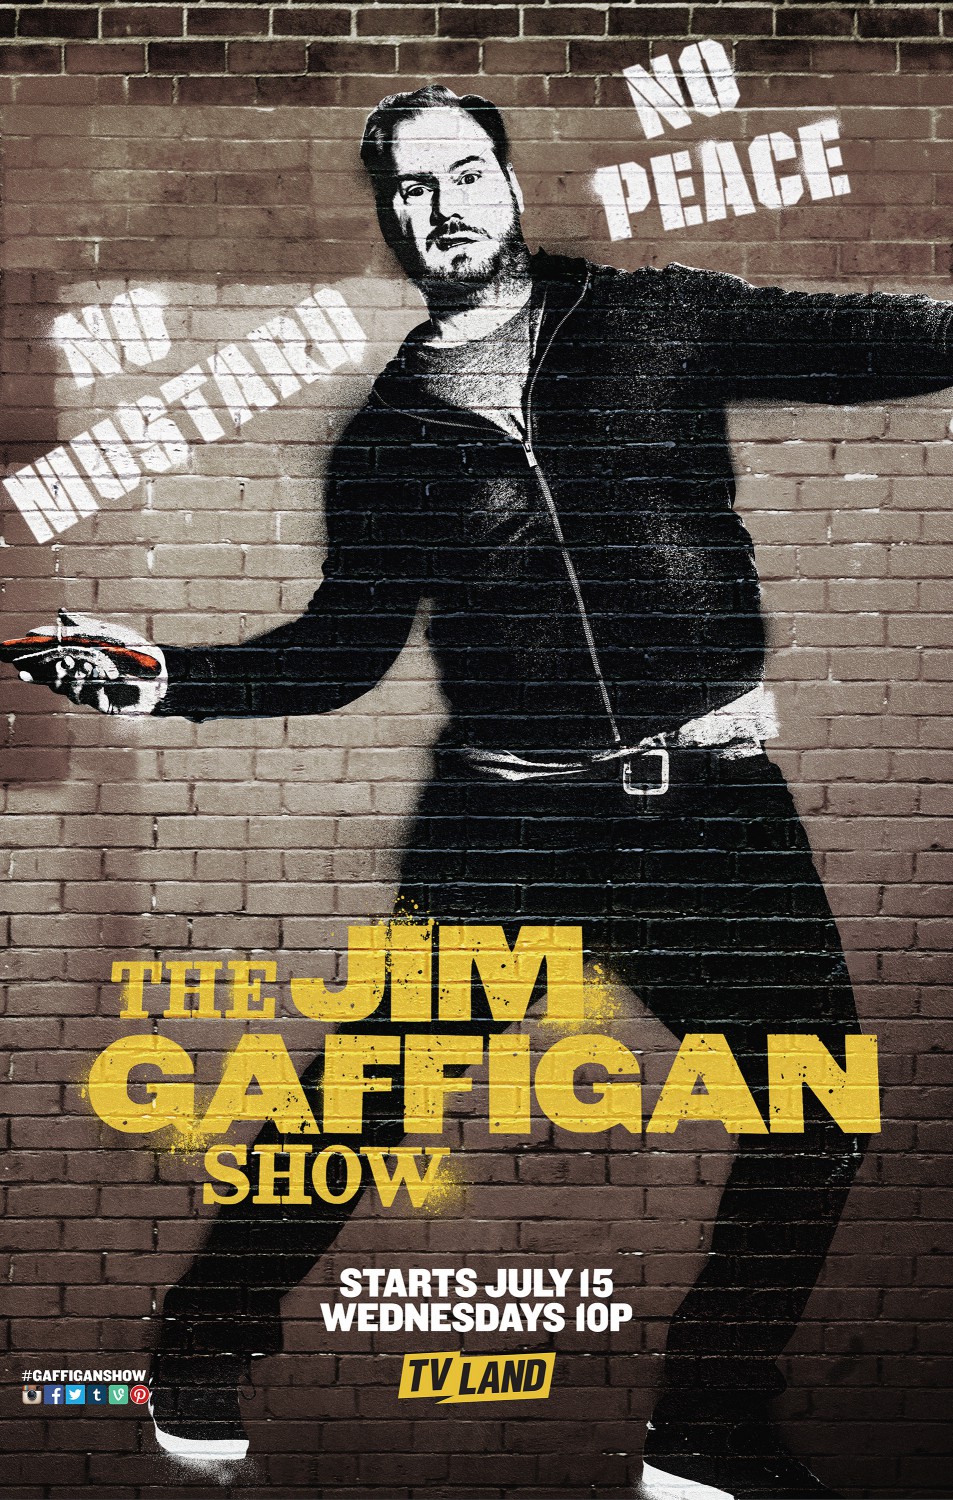 Extra Large TV Poster Image for The Jim Gaffigan Show (#2 of 7)